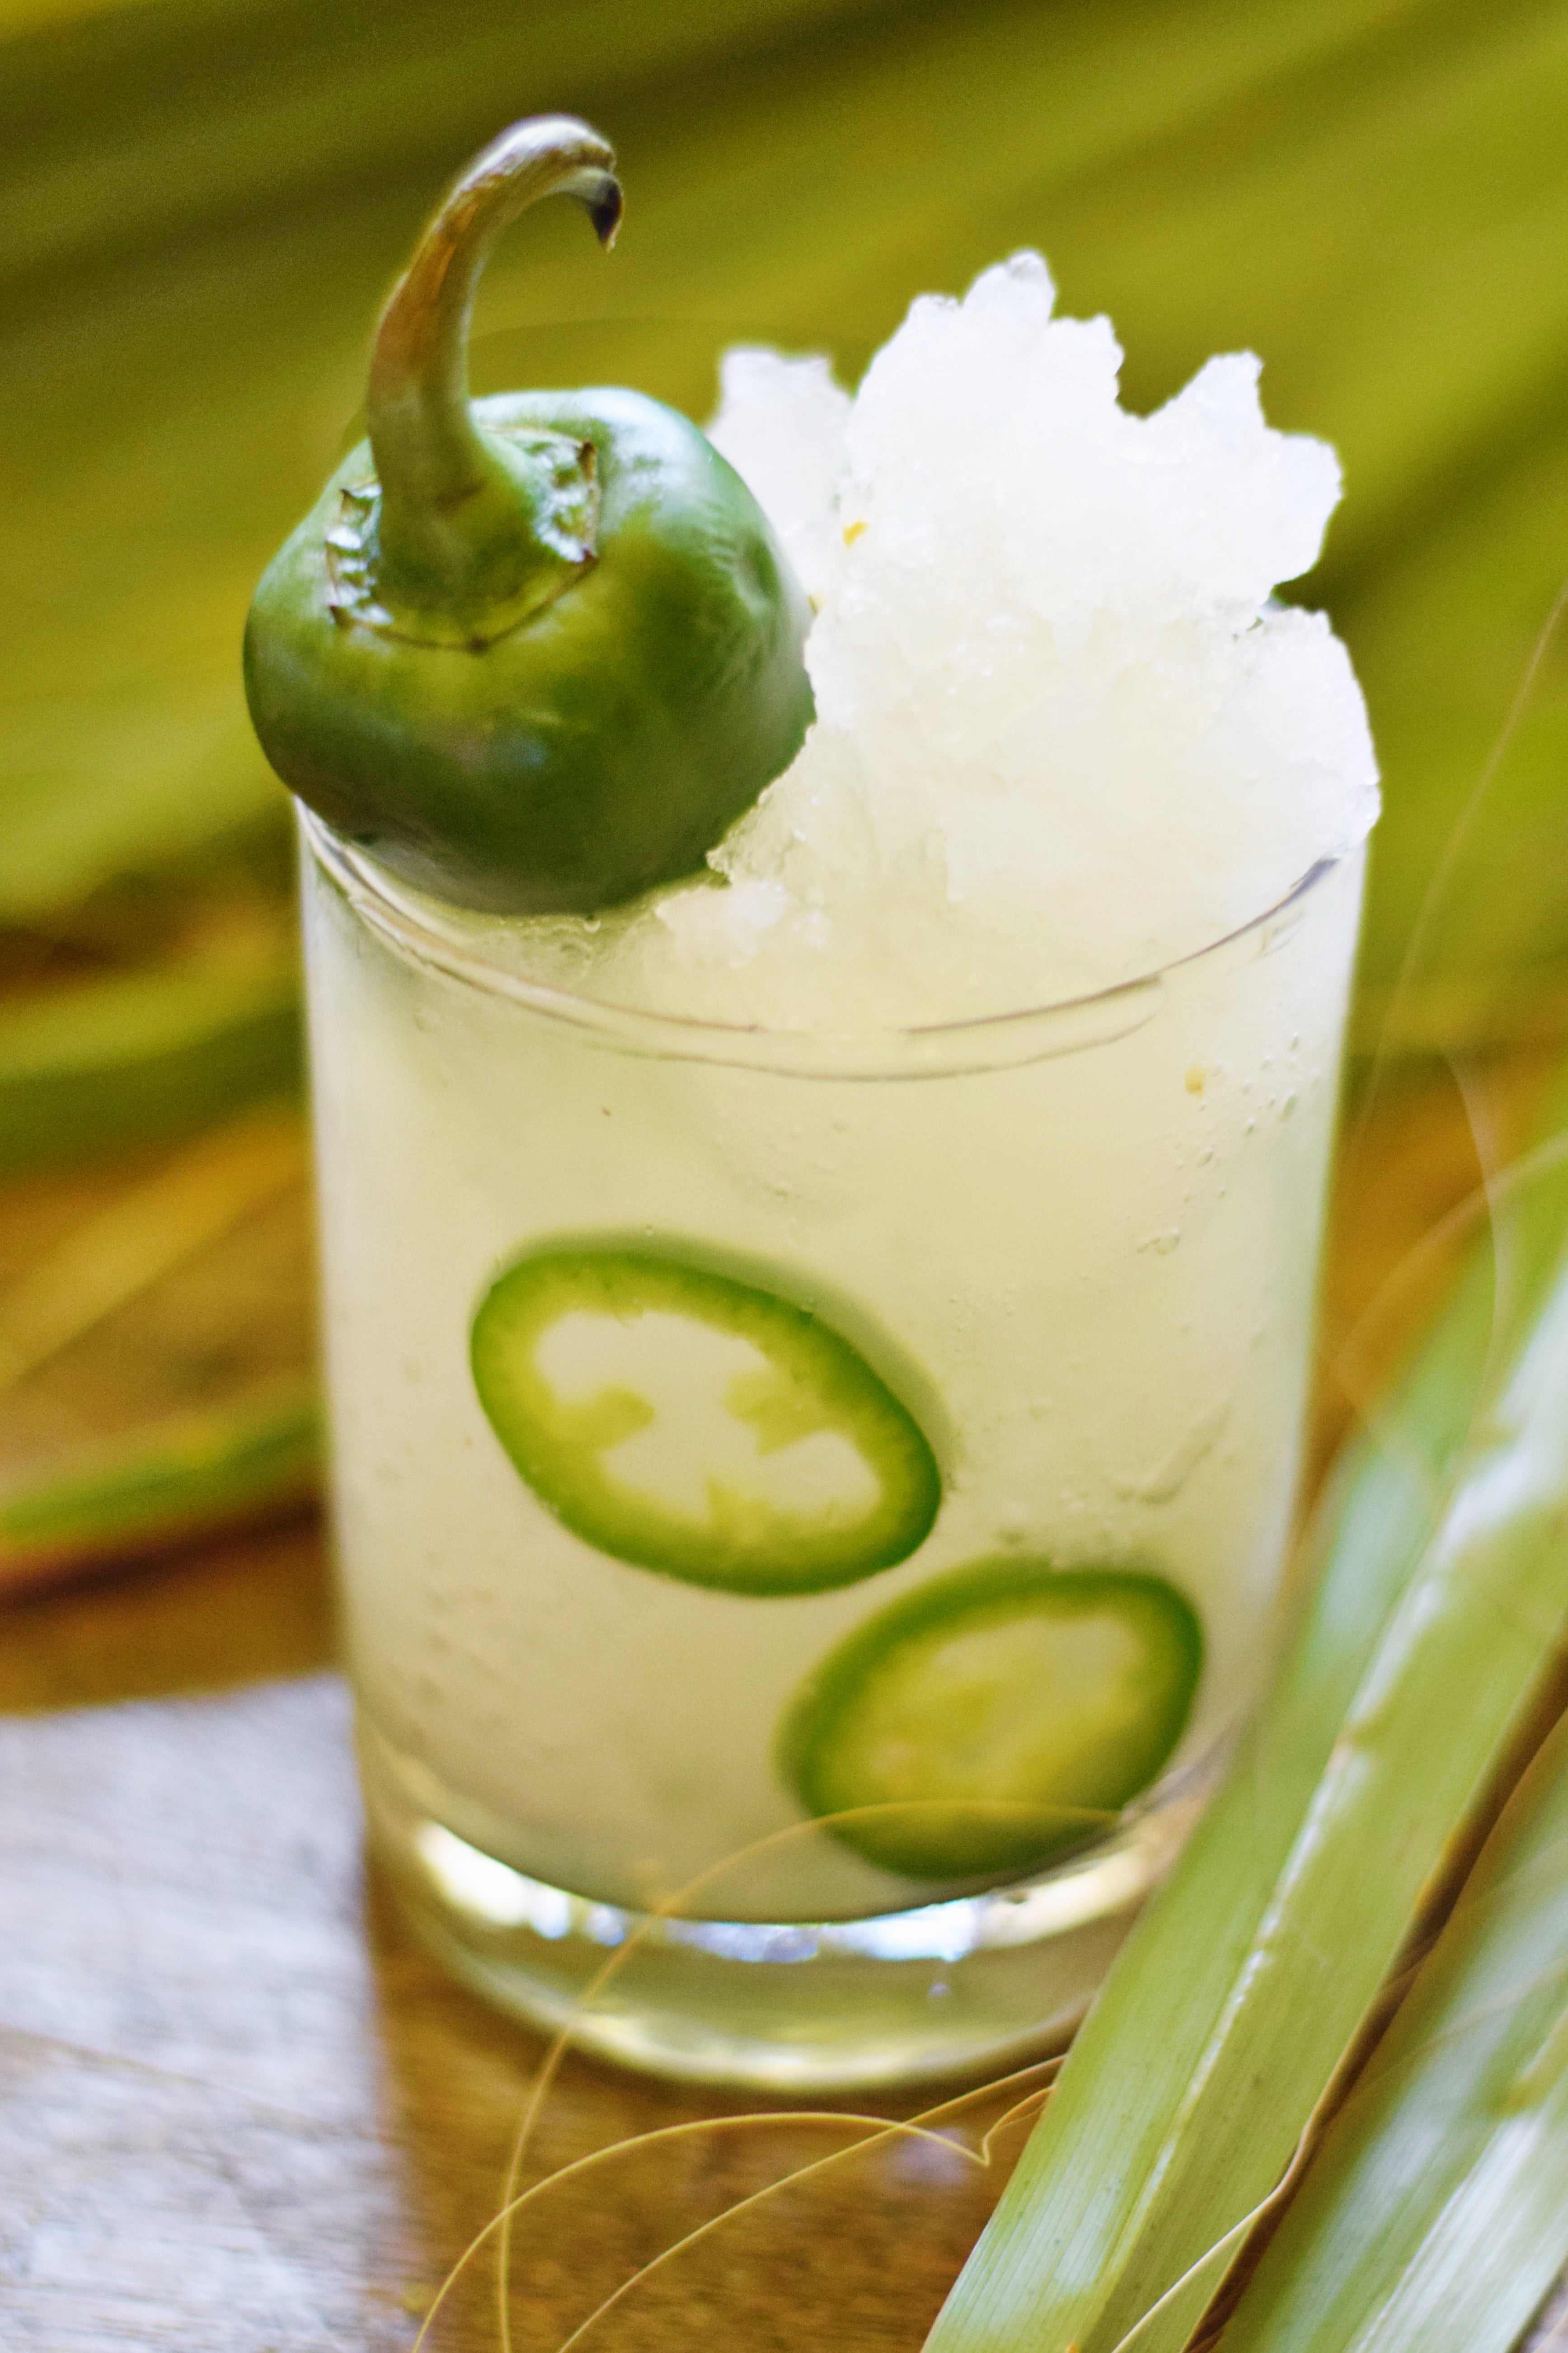 FROZEN JALAPENO LEMONADE - A refreshing frozen mocktail or cocktail that brings a sour punch of lemonade with a spicy jalapeño aftertaste! | Jalapeño Lemonade - Lemonade Cocktail - Lemonade Mocktail - Jalapeño Lemonade Cocktail - Summer Cocktail - Easy Cocktail - #cocktail #summer #recipe